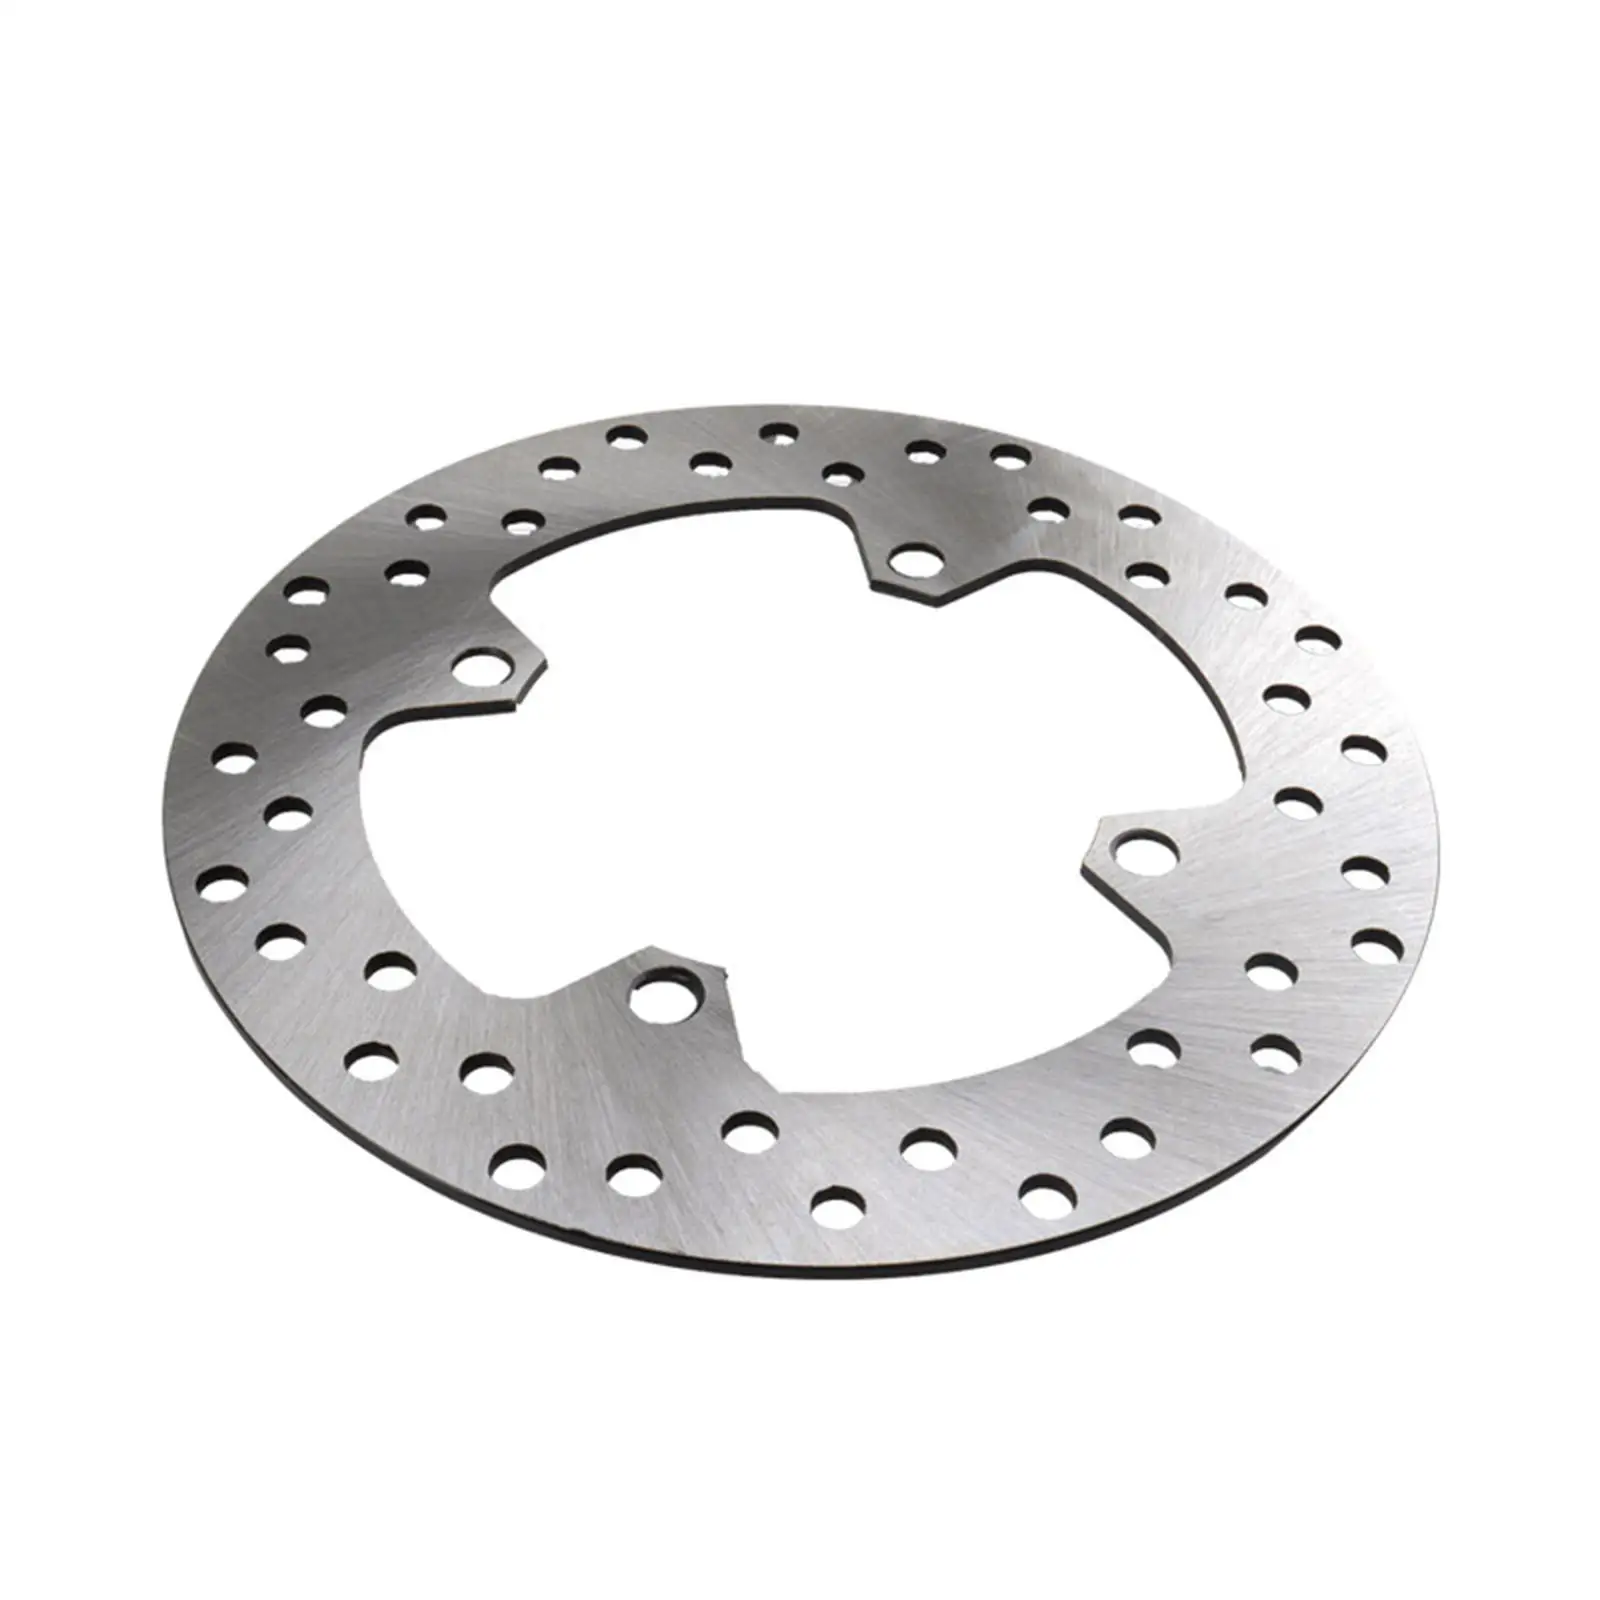 Motorcycle Brake Disc Rotor Sturdy Direct Replaces Accessories High Performance for Honda TRX400EX XR400 XR600R CBR125R